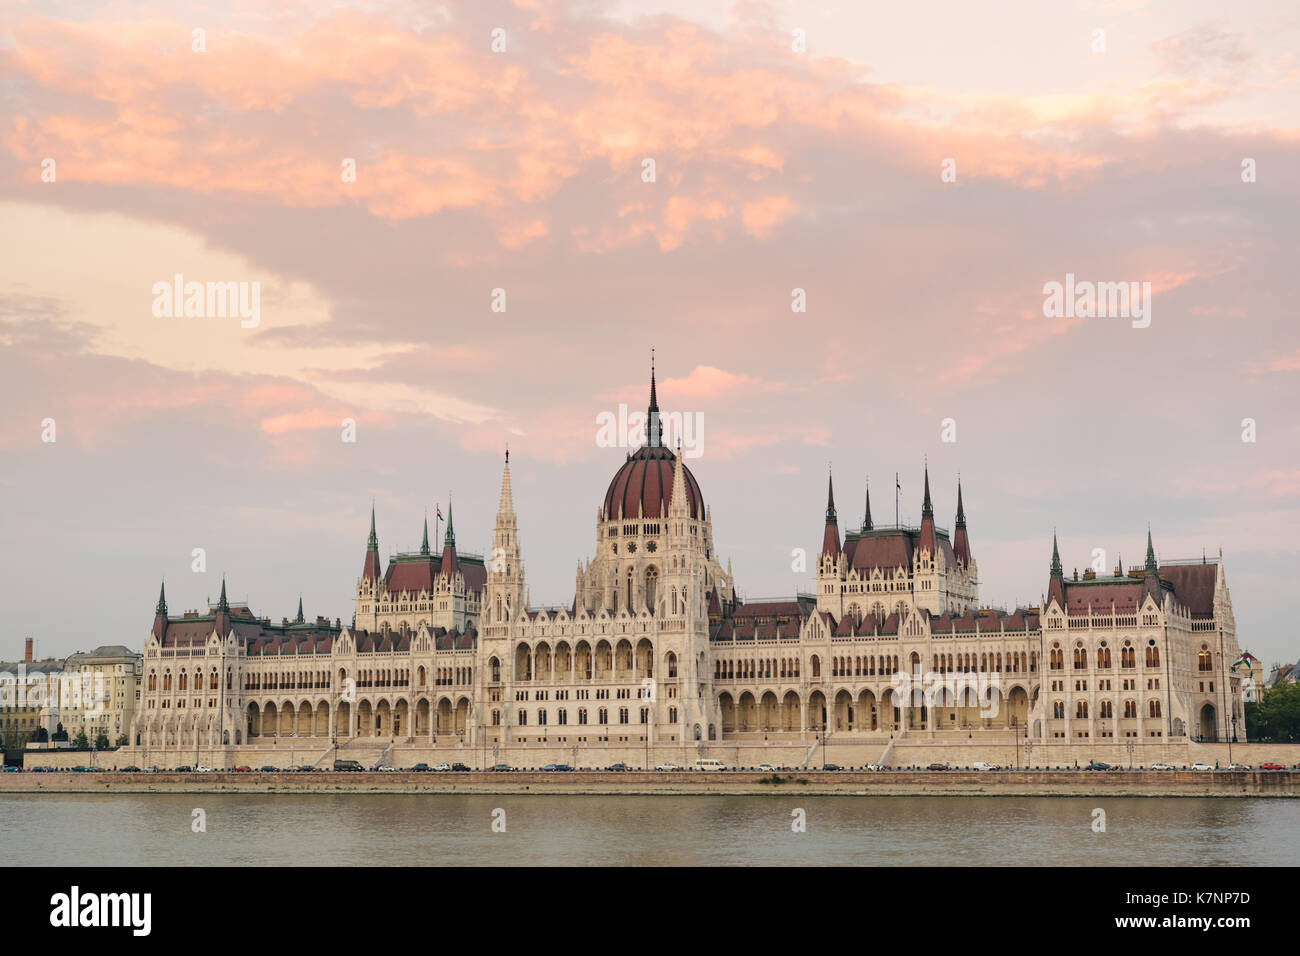 Image of the Hungarian Parliament in Budapest at sunset with the Danube in the foreground. Stock Photo